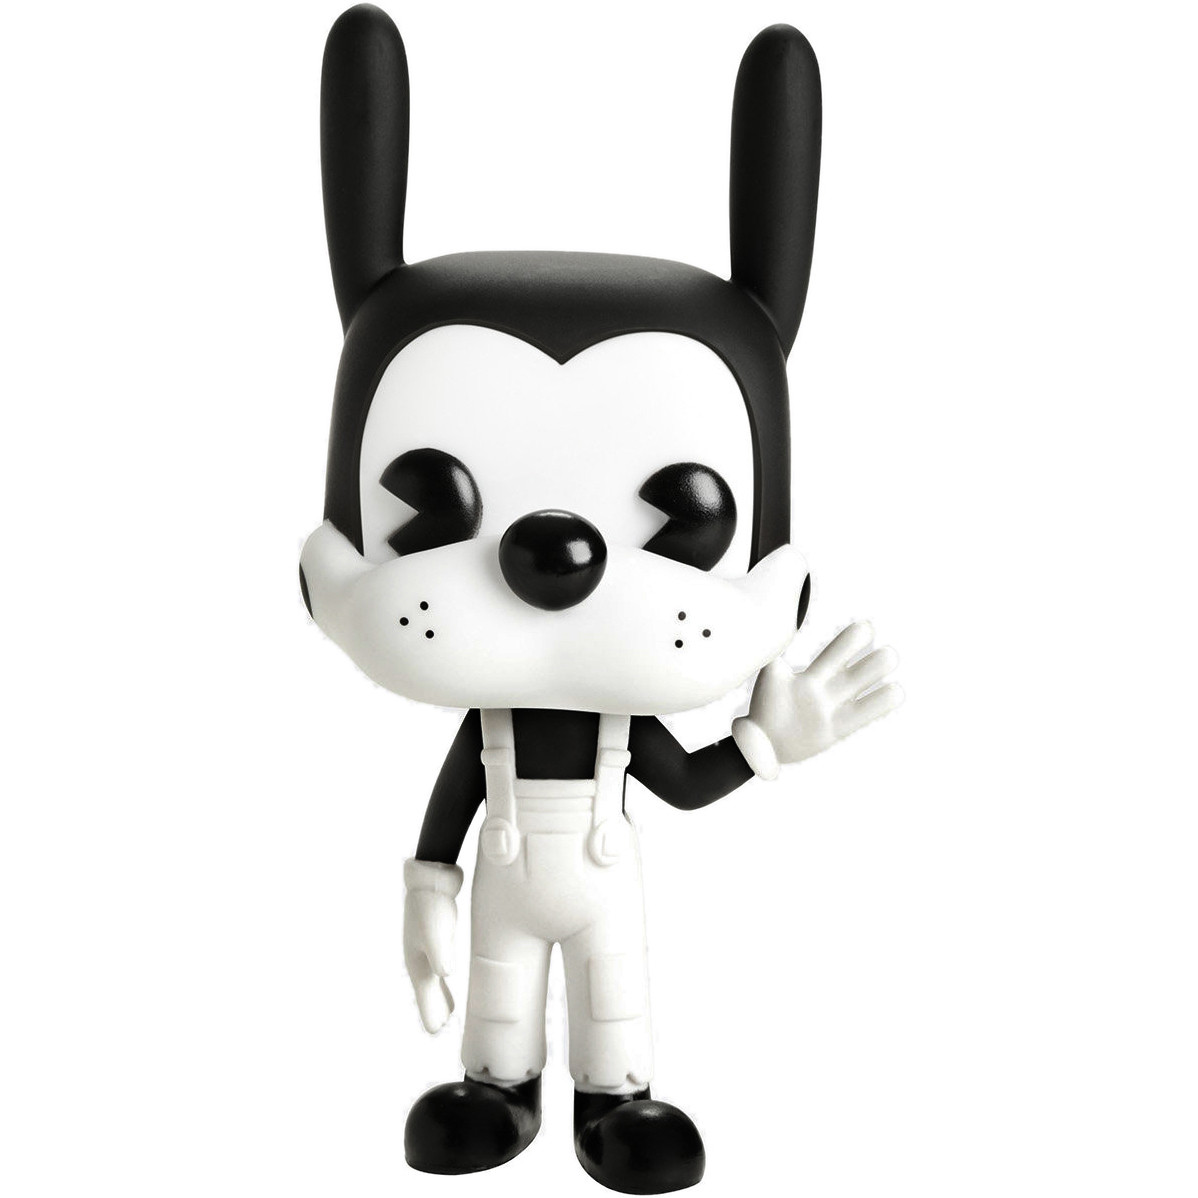 BENDY AND THE INK MACHINE BENDY ACTION FIGURE SERIES 2 BLACK AND